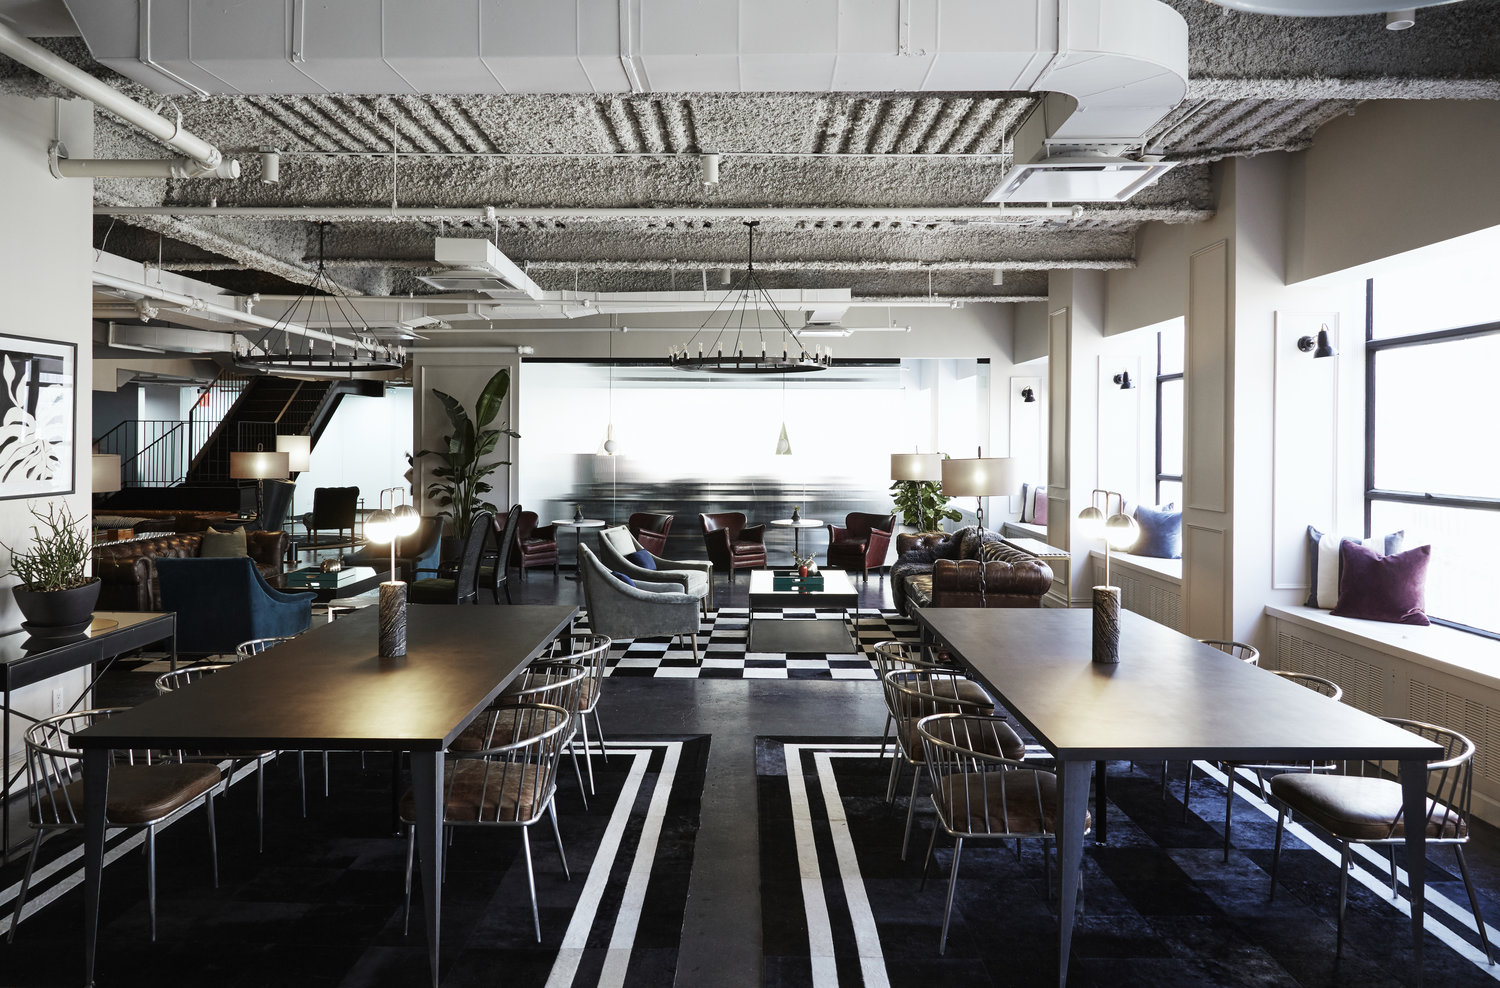 large tables and comfortable furniture combined to form a functional open office